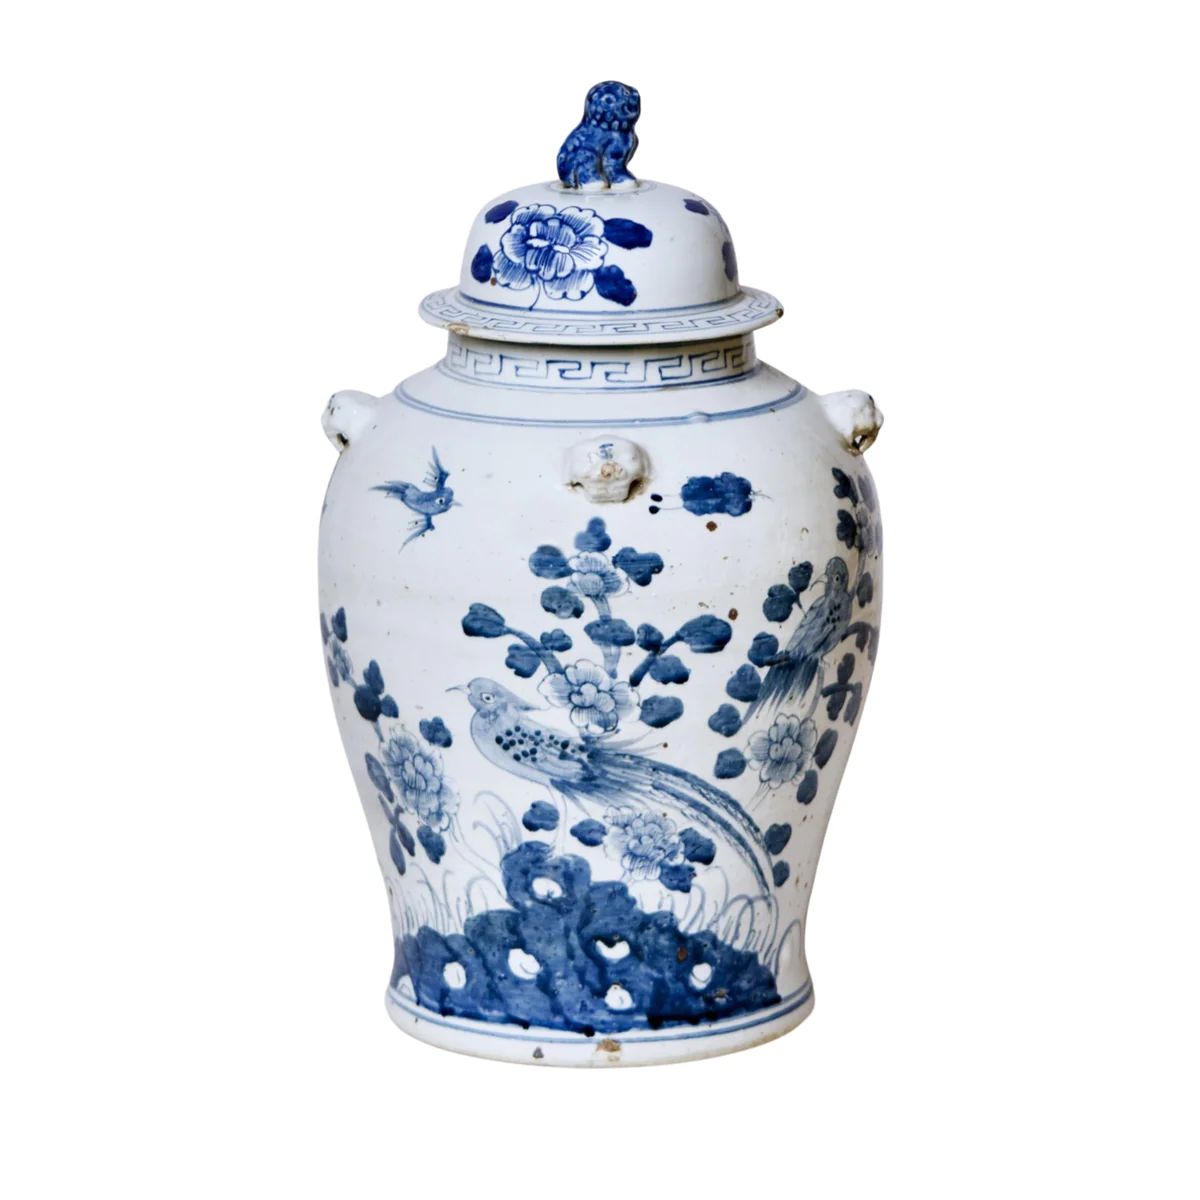 Bird and Flower Blue and White Porcelain Temple Jar | The Well Appointed House, LLC